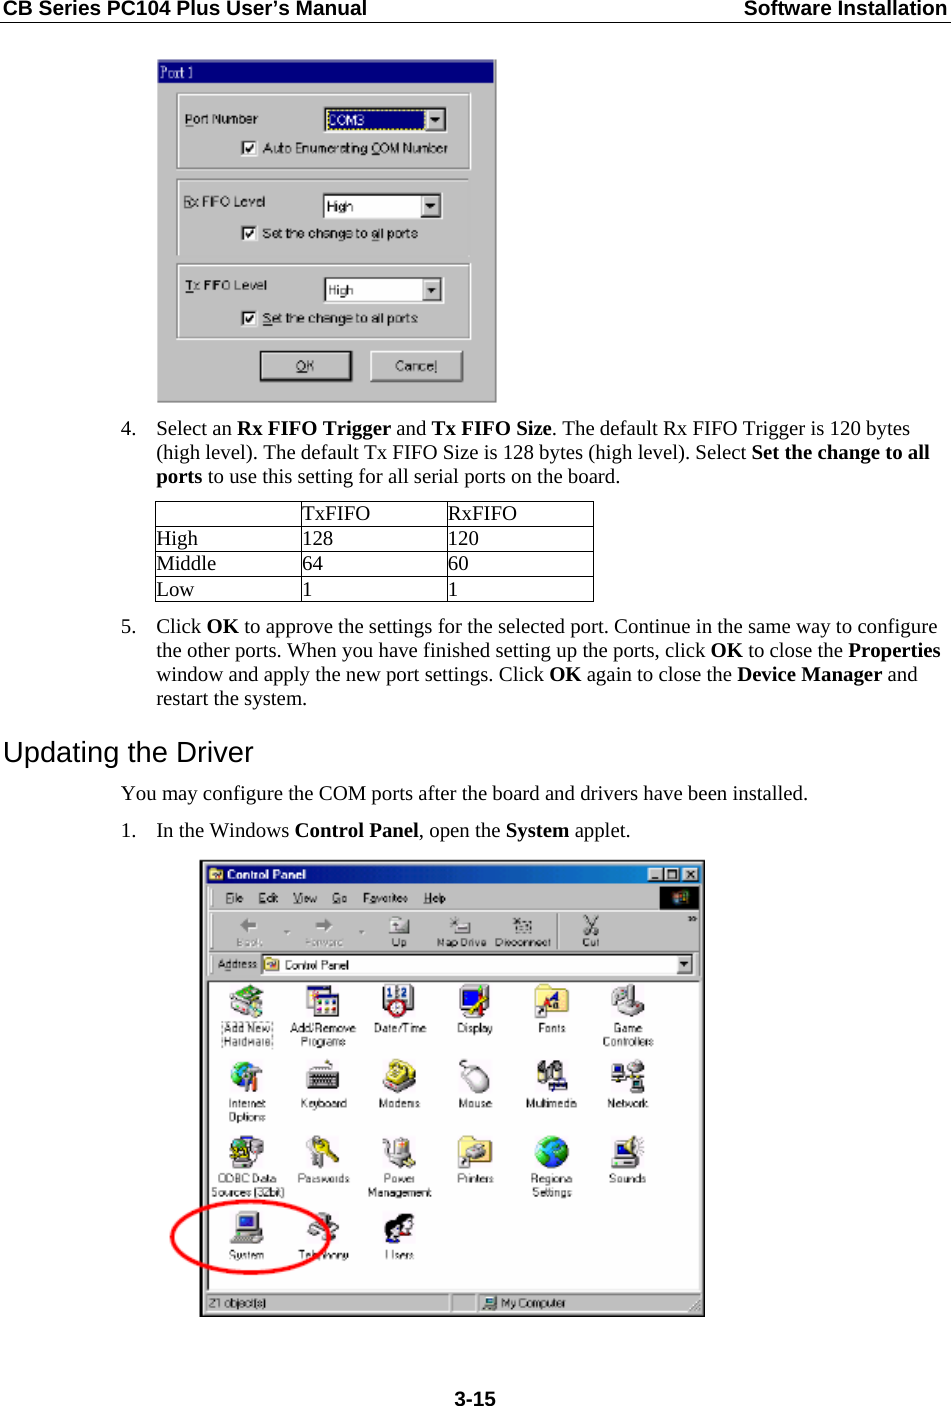 CB Series PC104 Plus User’s Manual  Software Installation  4. Select an Rx FIFO Trigger and Tx FIFO Size. The default Rx FIFO Trigger is 120 bytes (high level). The default Tx FIFO Size is 128 bytes (high level). Select Set the change to all ports to use this setting for all serial ports on the board.  TxFIFO RxFIFO High 128  120 Middle 64  60 Low 1  1 5. Click OK to approve the settings for the selected port. Continue in the same way to configure the other ports. When you have finished setting up the ports, click OK to close the Properties window and apply the new port settings. Click OK again to close the Device Manager and restart the system. Updating the Driver You may configure the COM ports after the board and drivers have been installed. 1. In the Windows Control Panel, open the System applet.   3-15